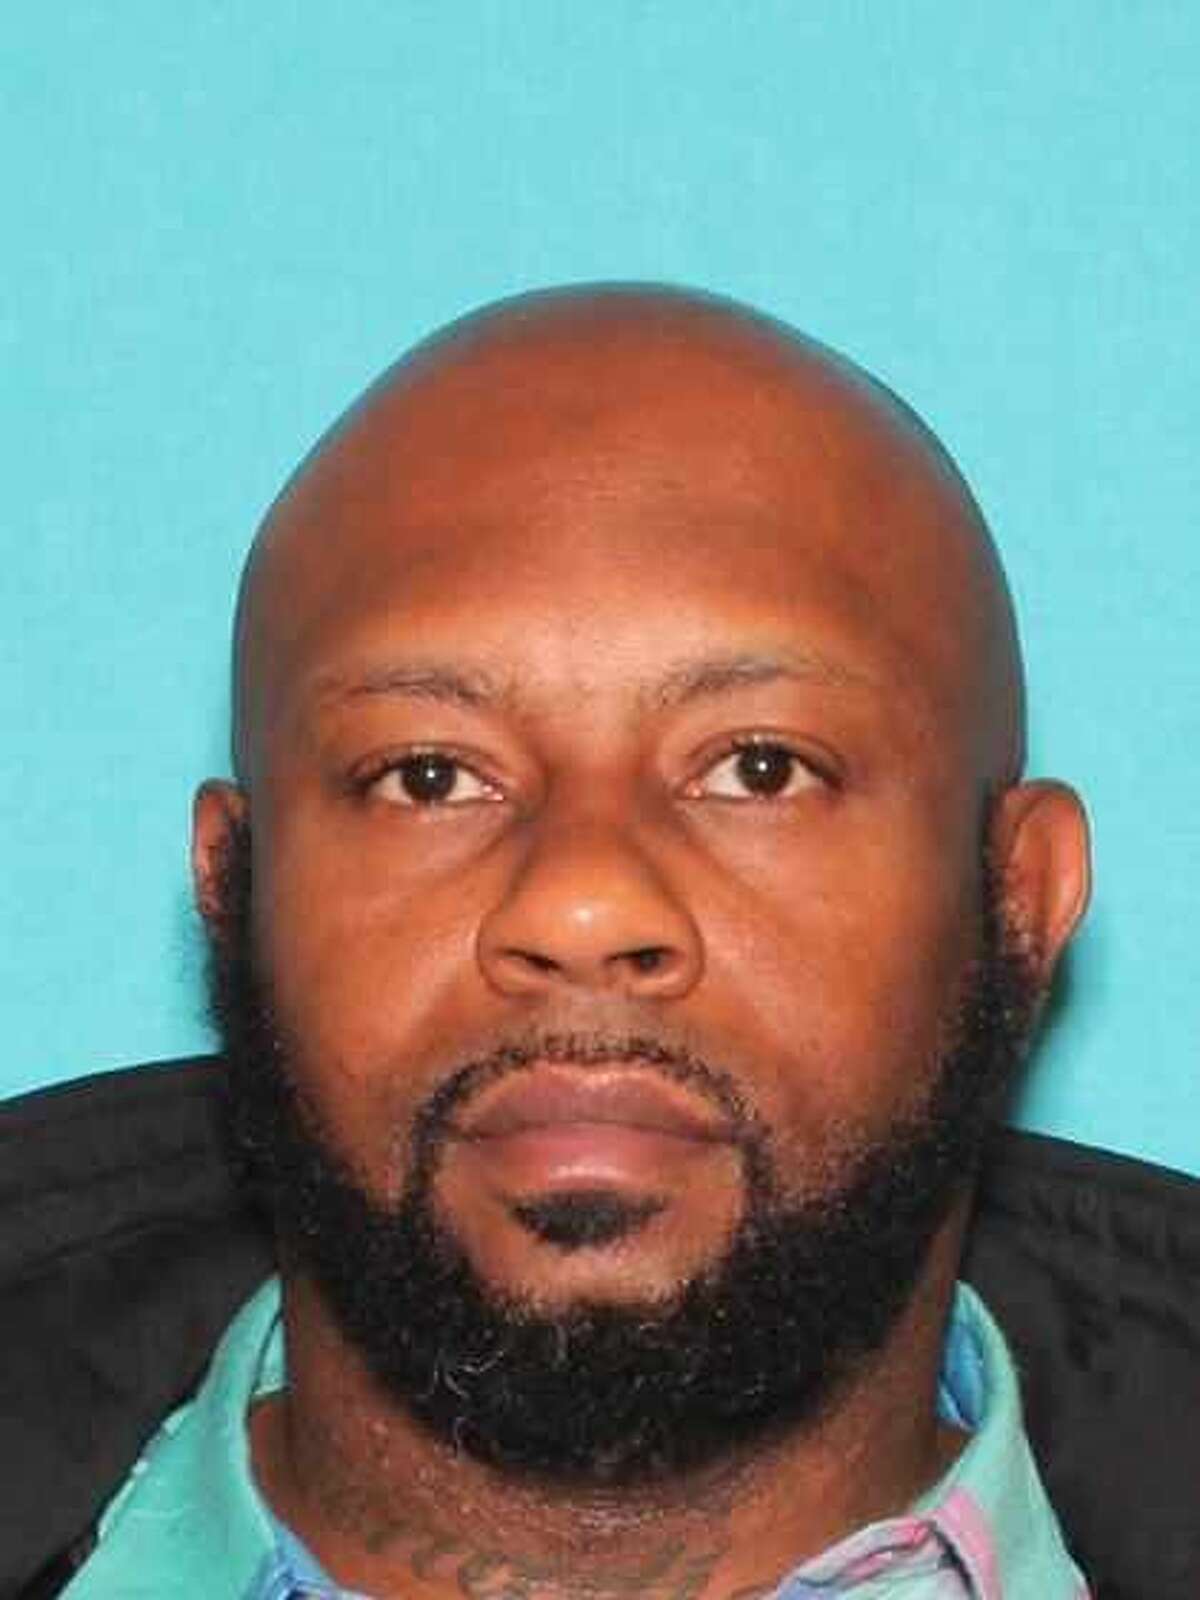 Kendrick Akins, 39, was being sought for questioning in the Jan. 4, 2020, shooting death of his fiancee.